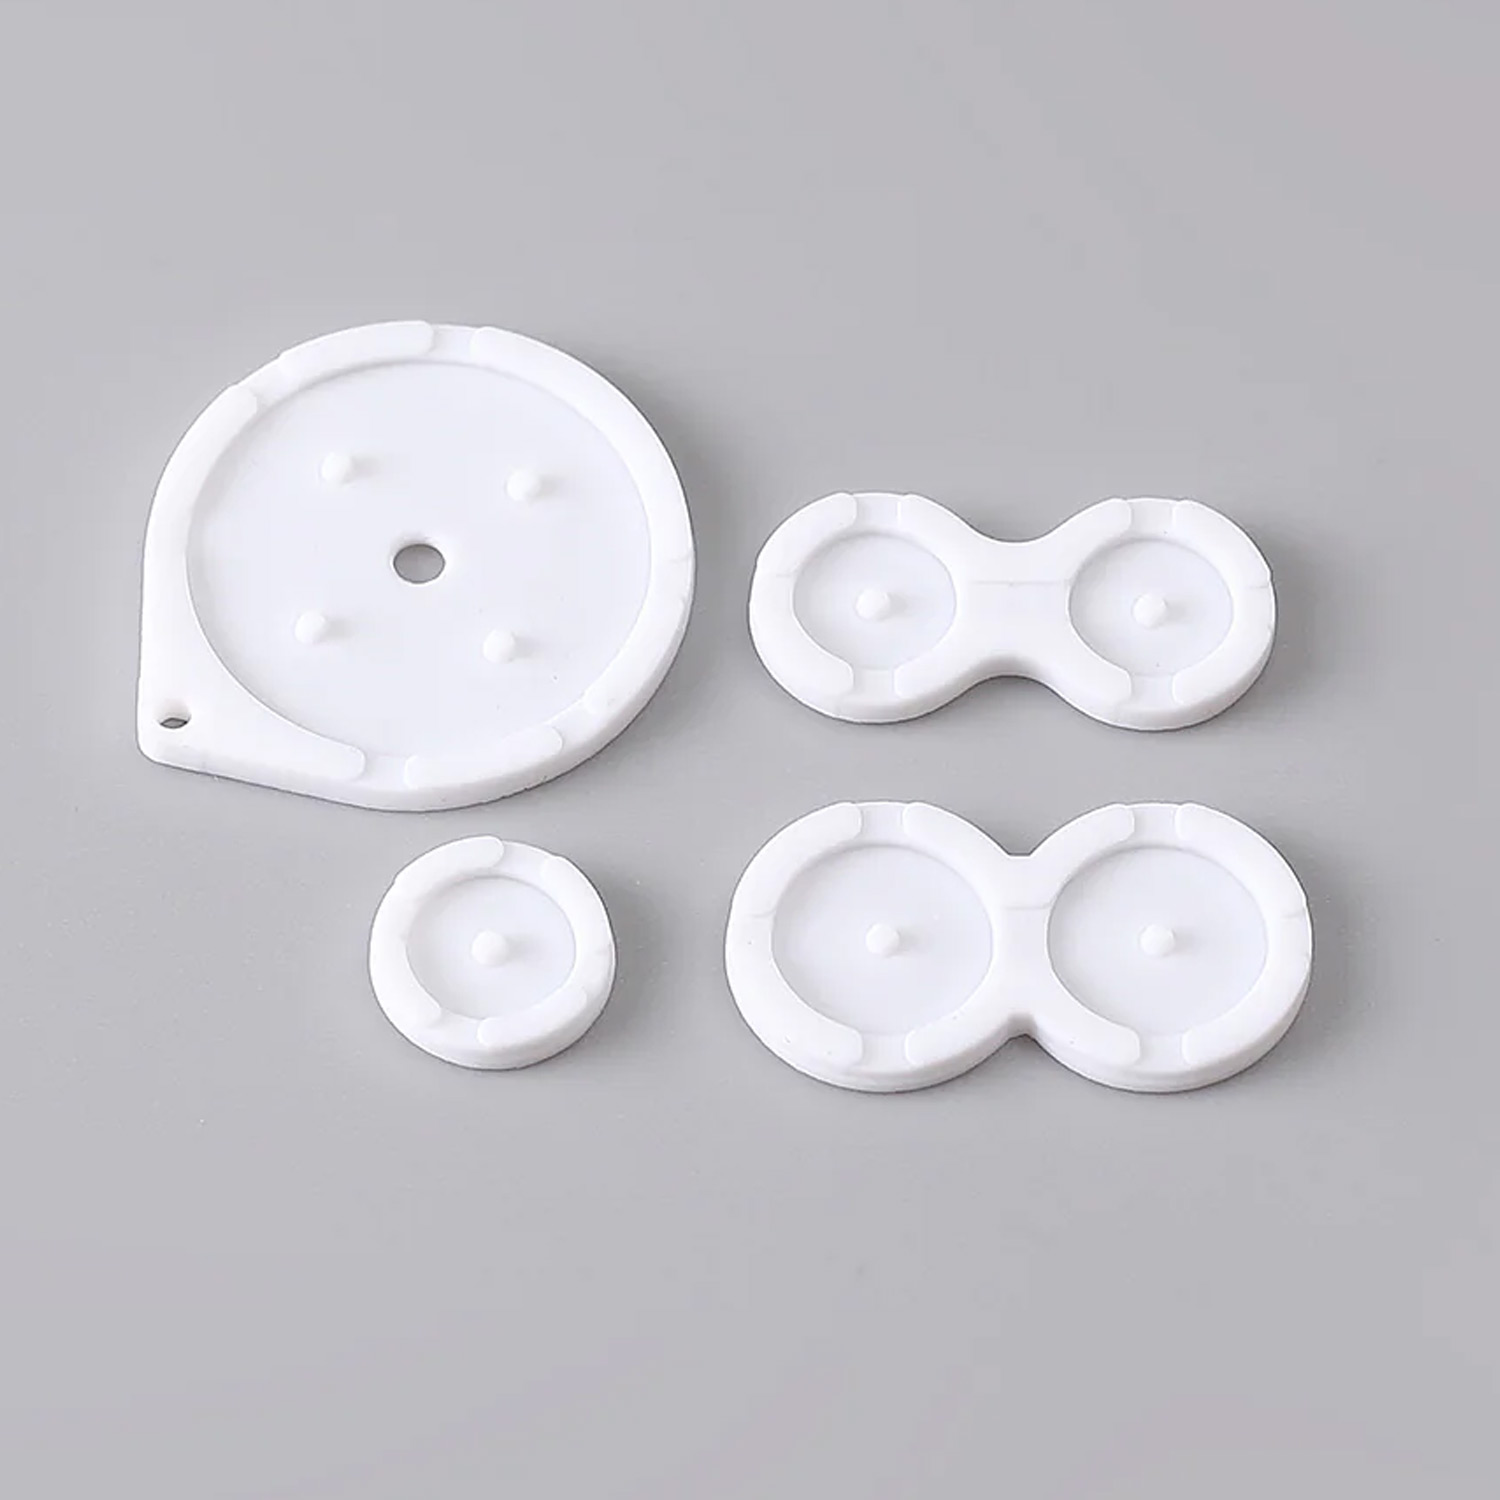 Game Boy Advance SP Silicone Pads (White)